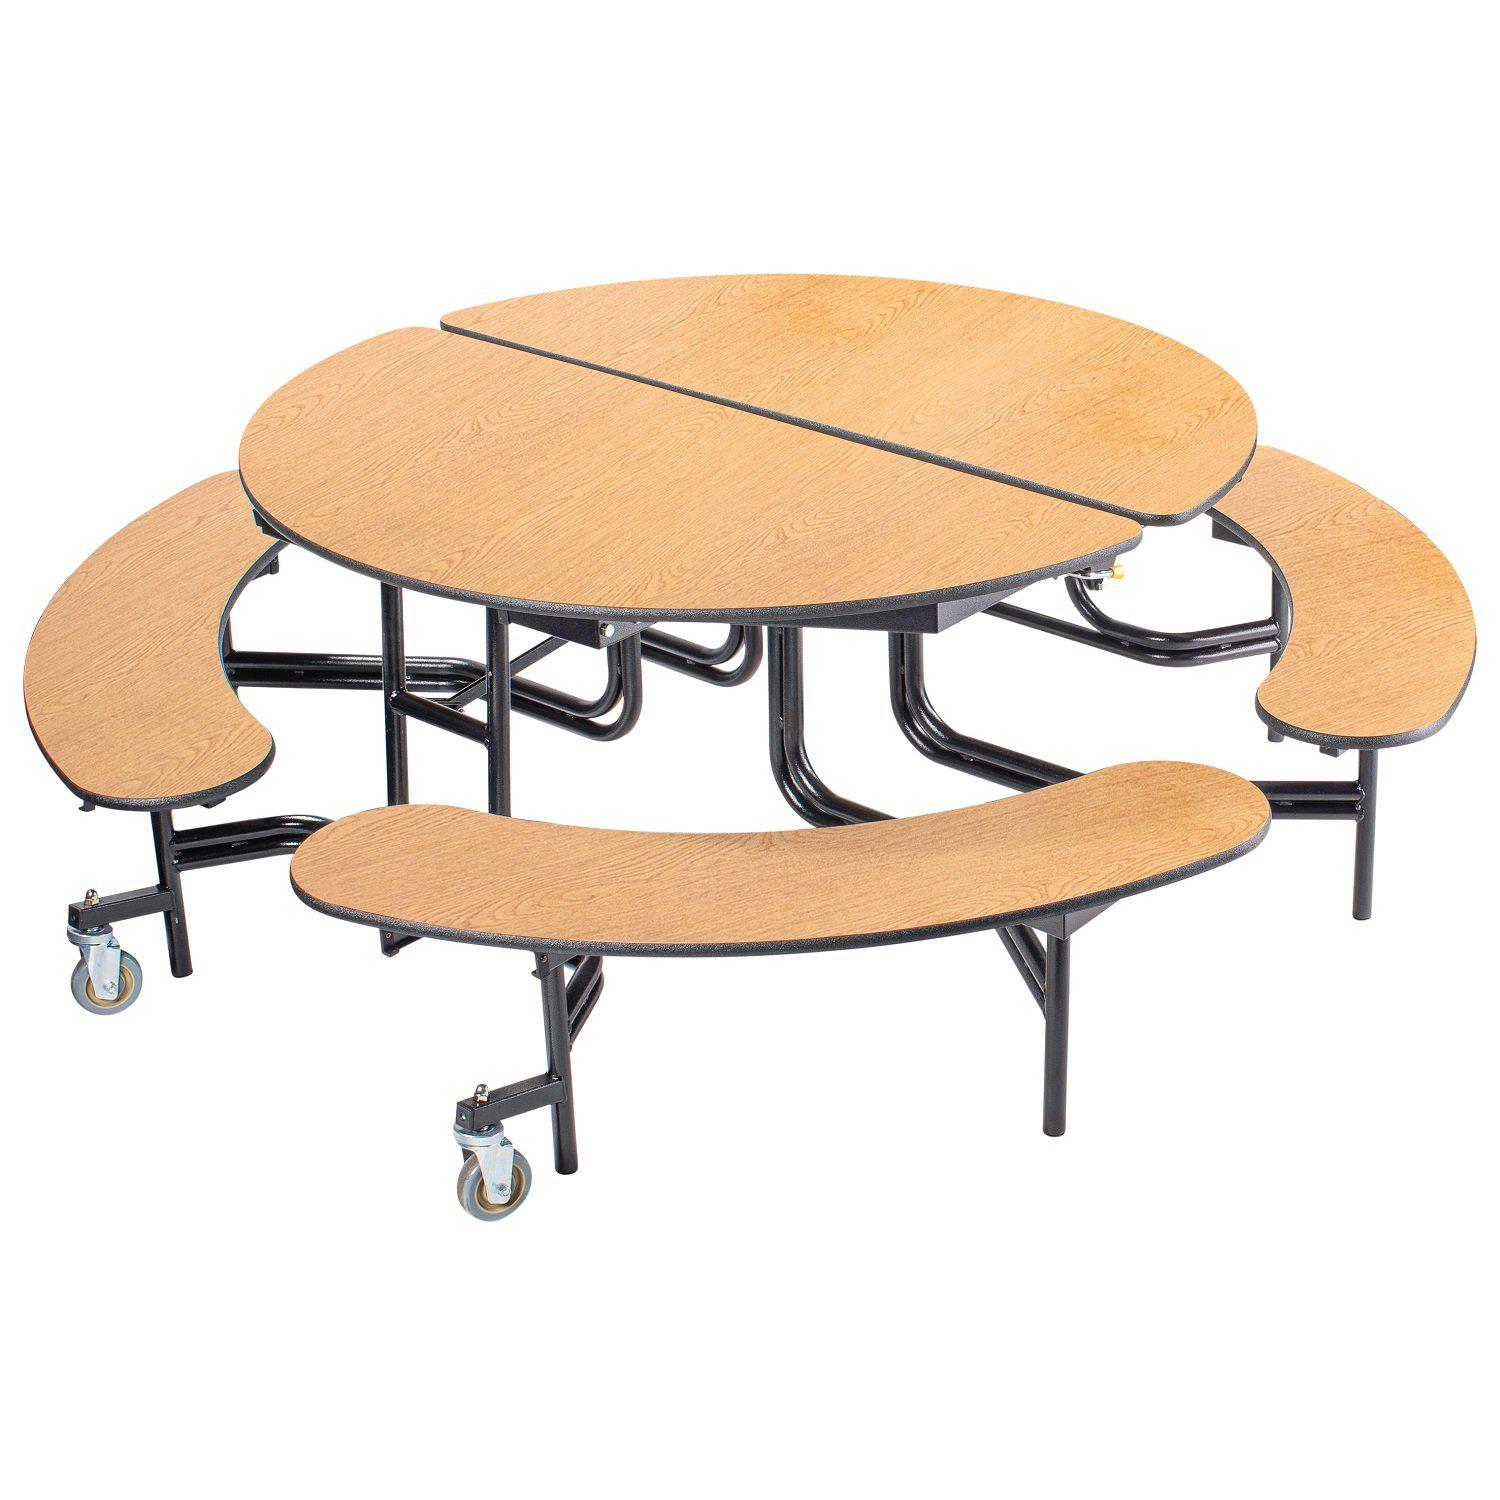 Mobile Cafeteria Table with Benches, 60" Round, Particleboard Core, Vinyl T-Mold Edge, Textured Black Frame